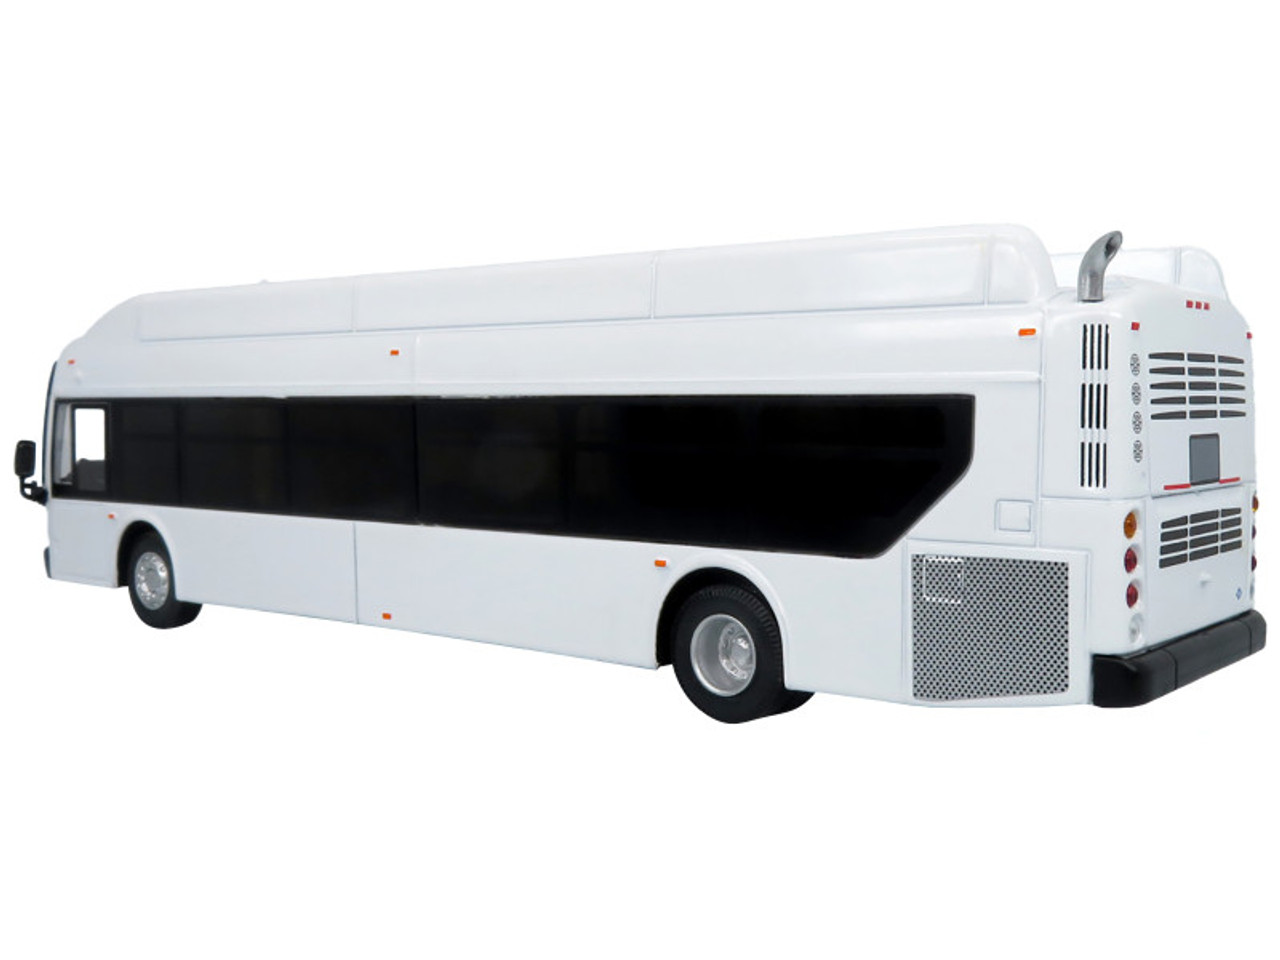 New Flyer Industries Xcelsior XN40 Transit Bus Blank White Limited Edition to 504 pieces Worldwide "The Bus & Motorcoach Collection" 1/64 Diecast Model by Iconic Replicas